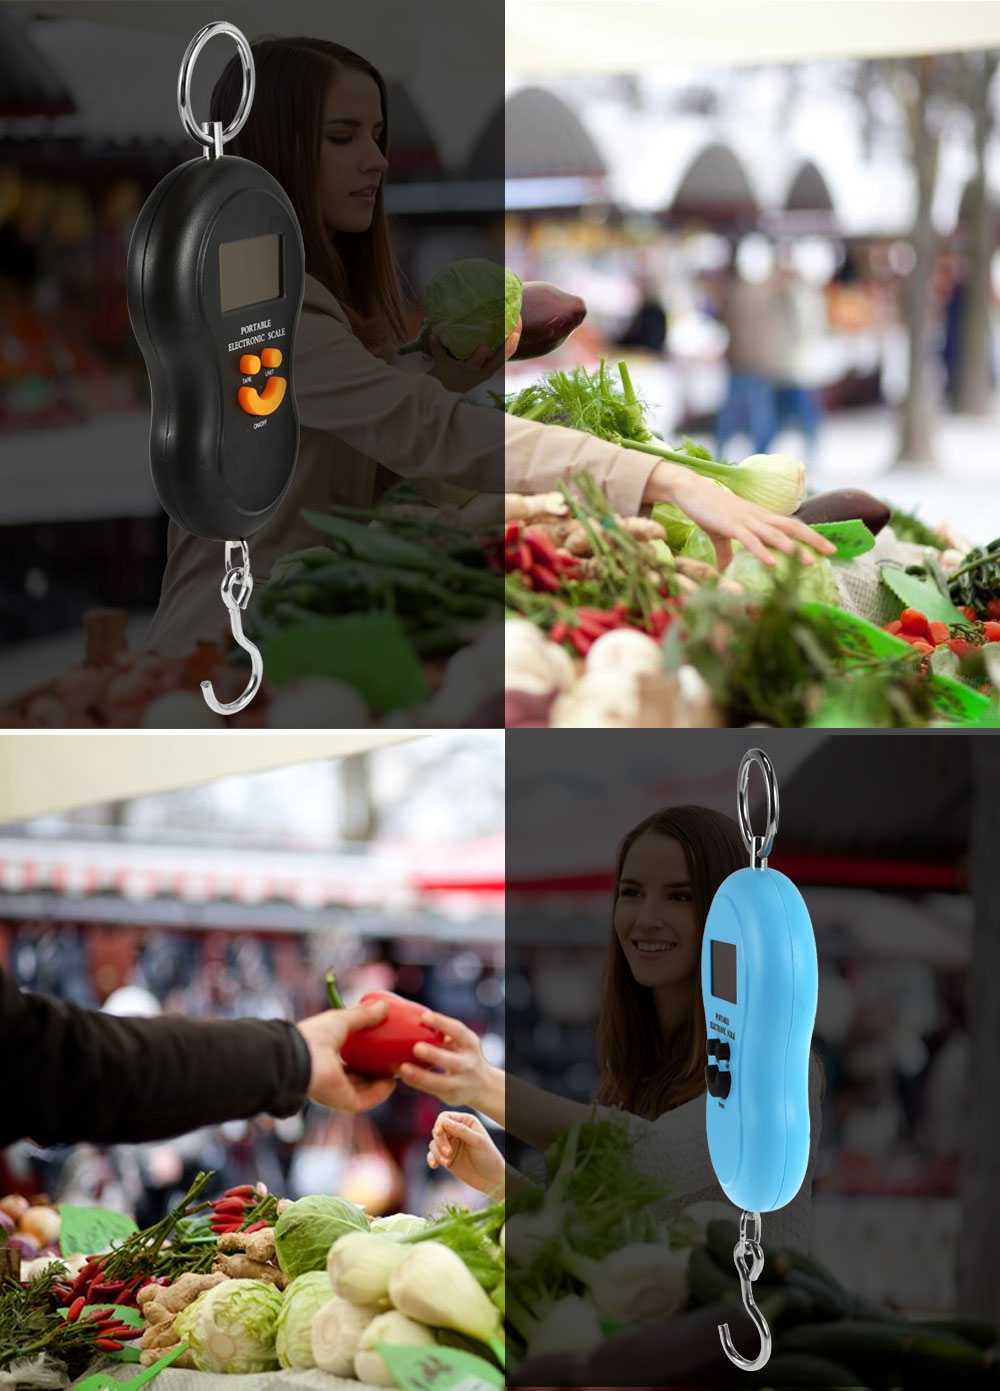 Gourd Shaped Portable Electronic Hook Scale for Weighing